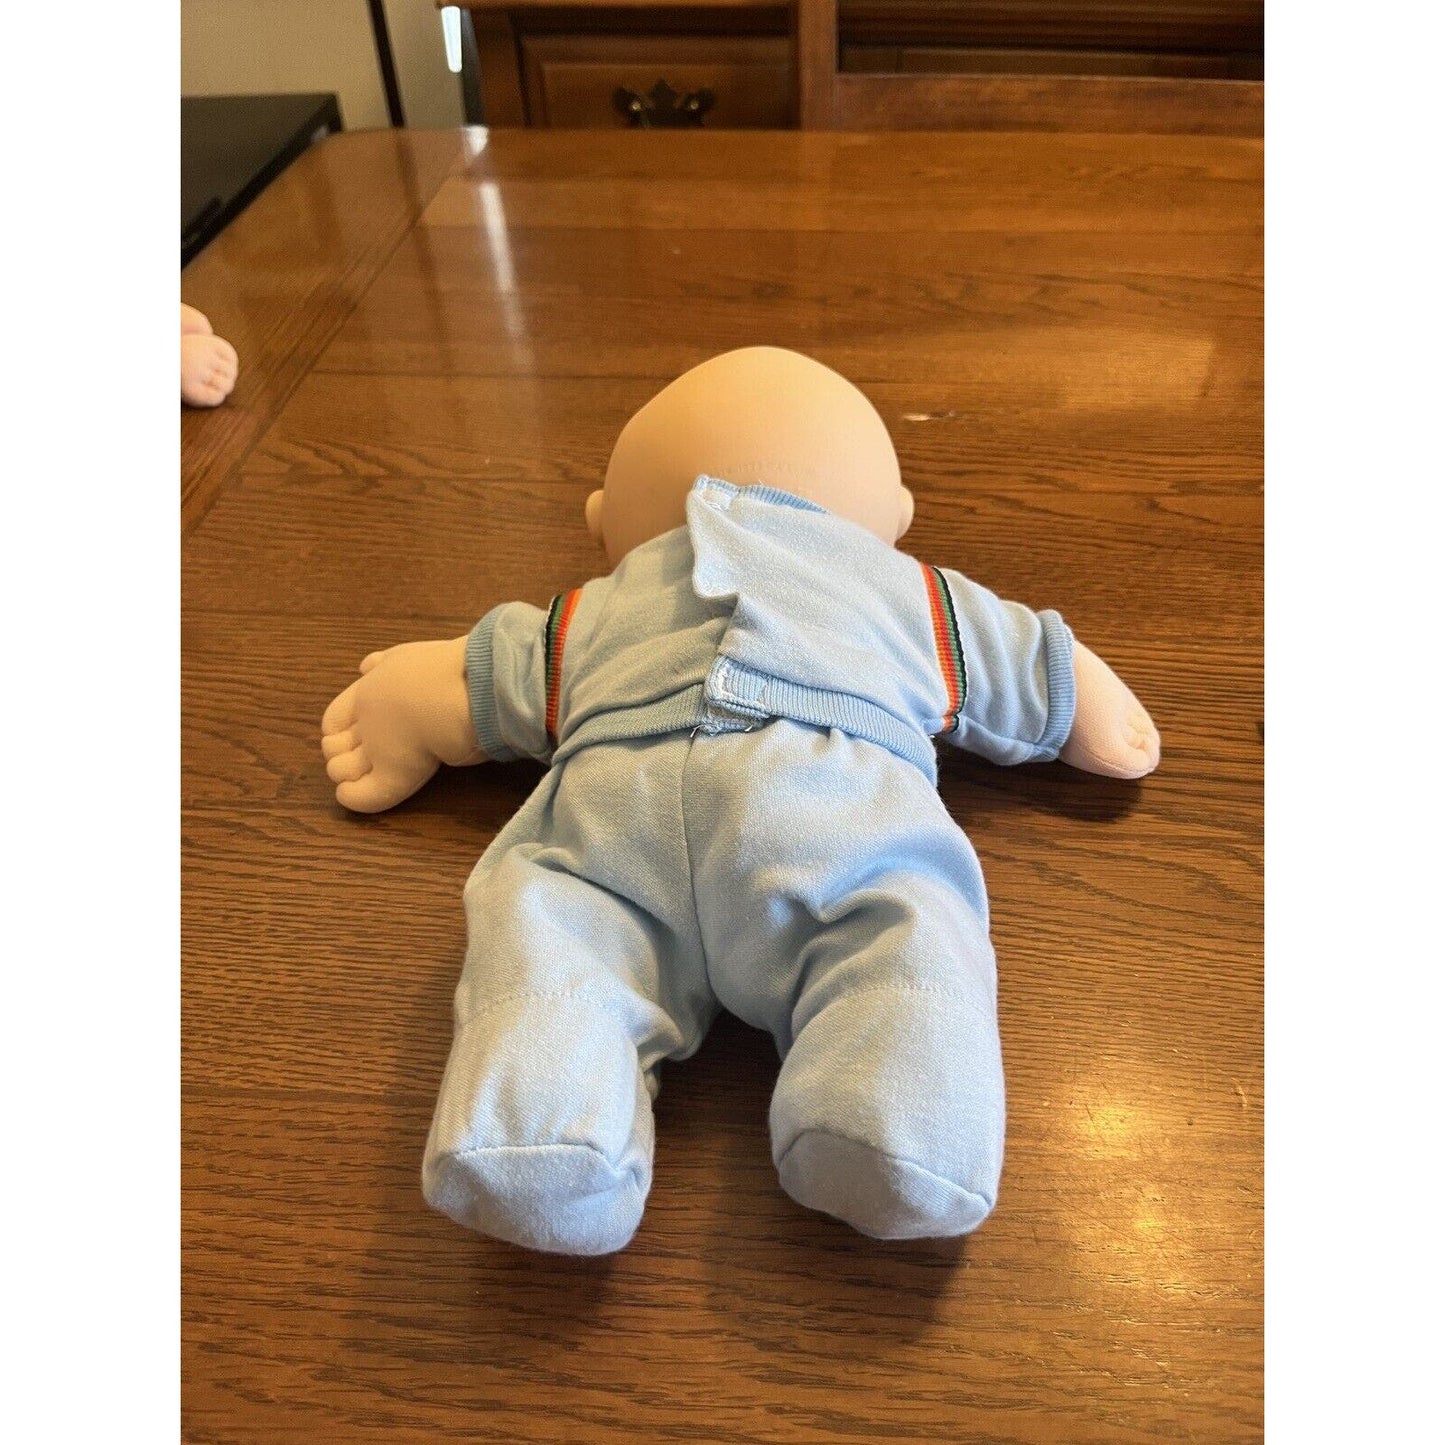 1980s Cabbage Patch Kid Bean Butt Baby BBB Bald Blue Eyes Teddy Bear Car Outfit